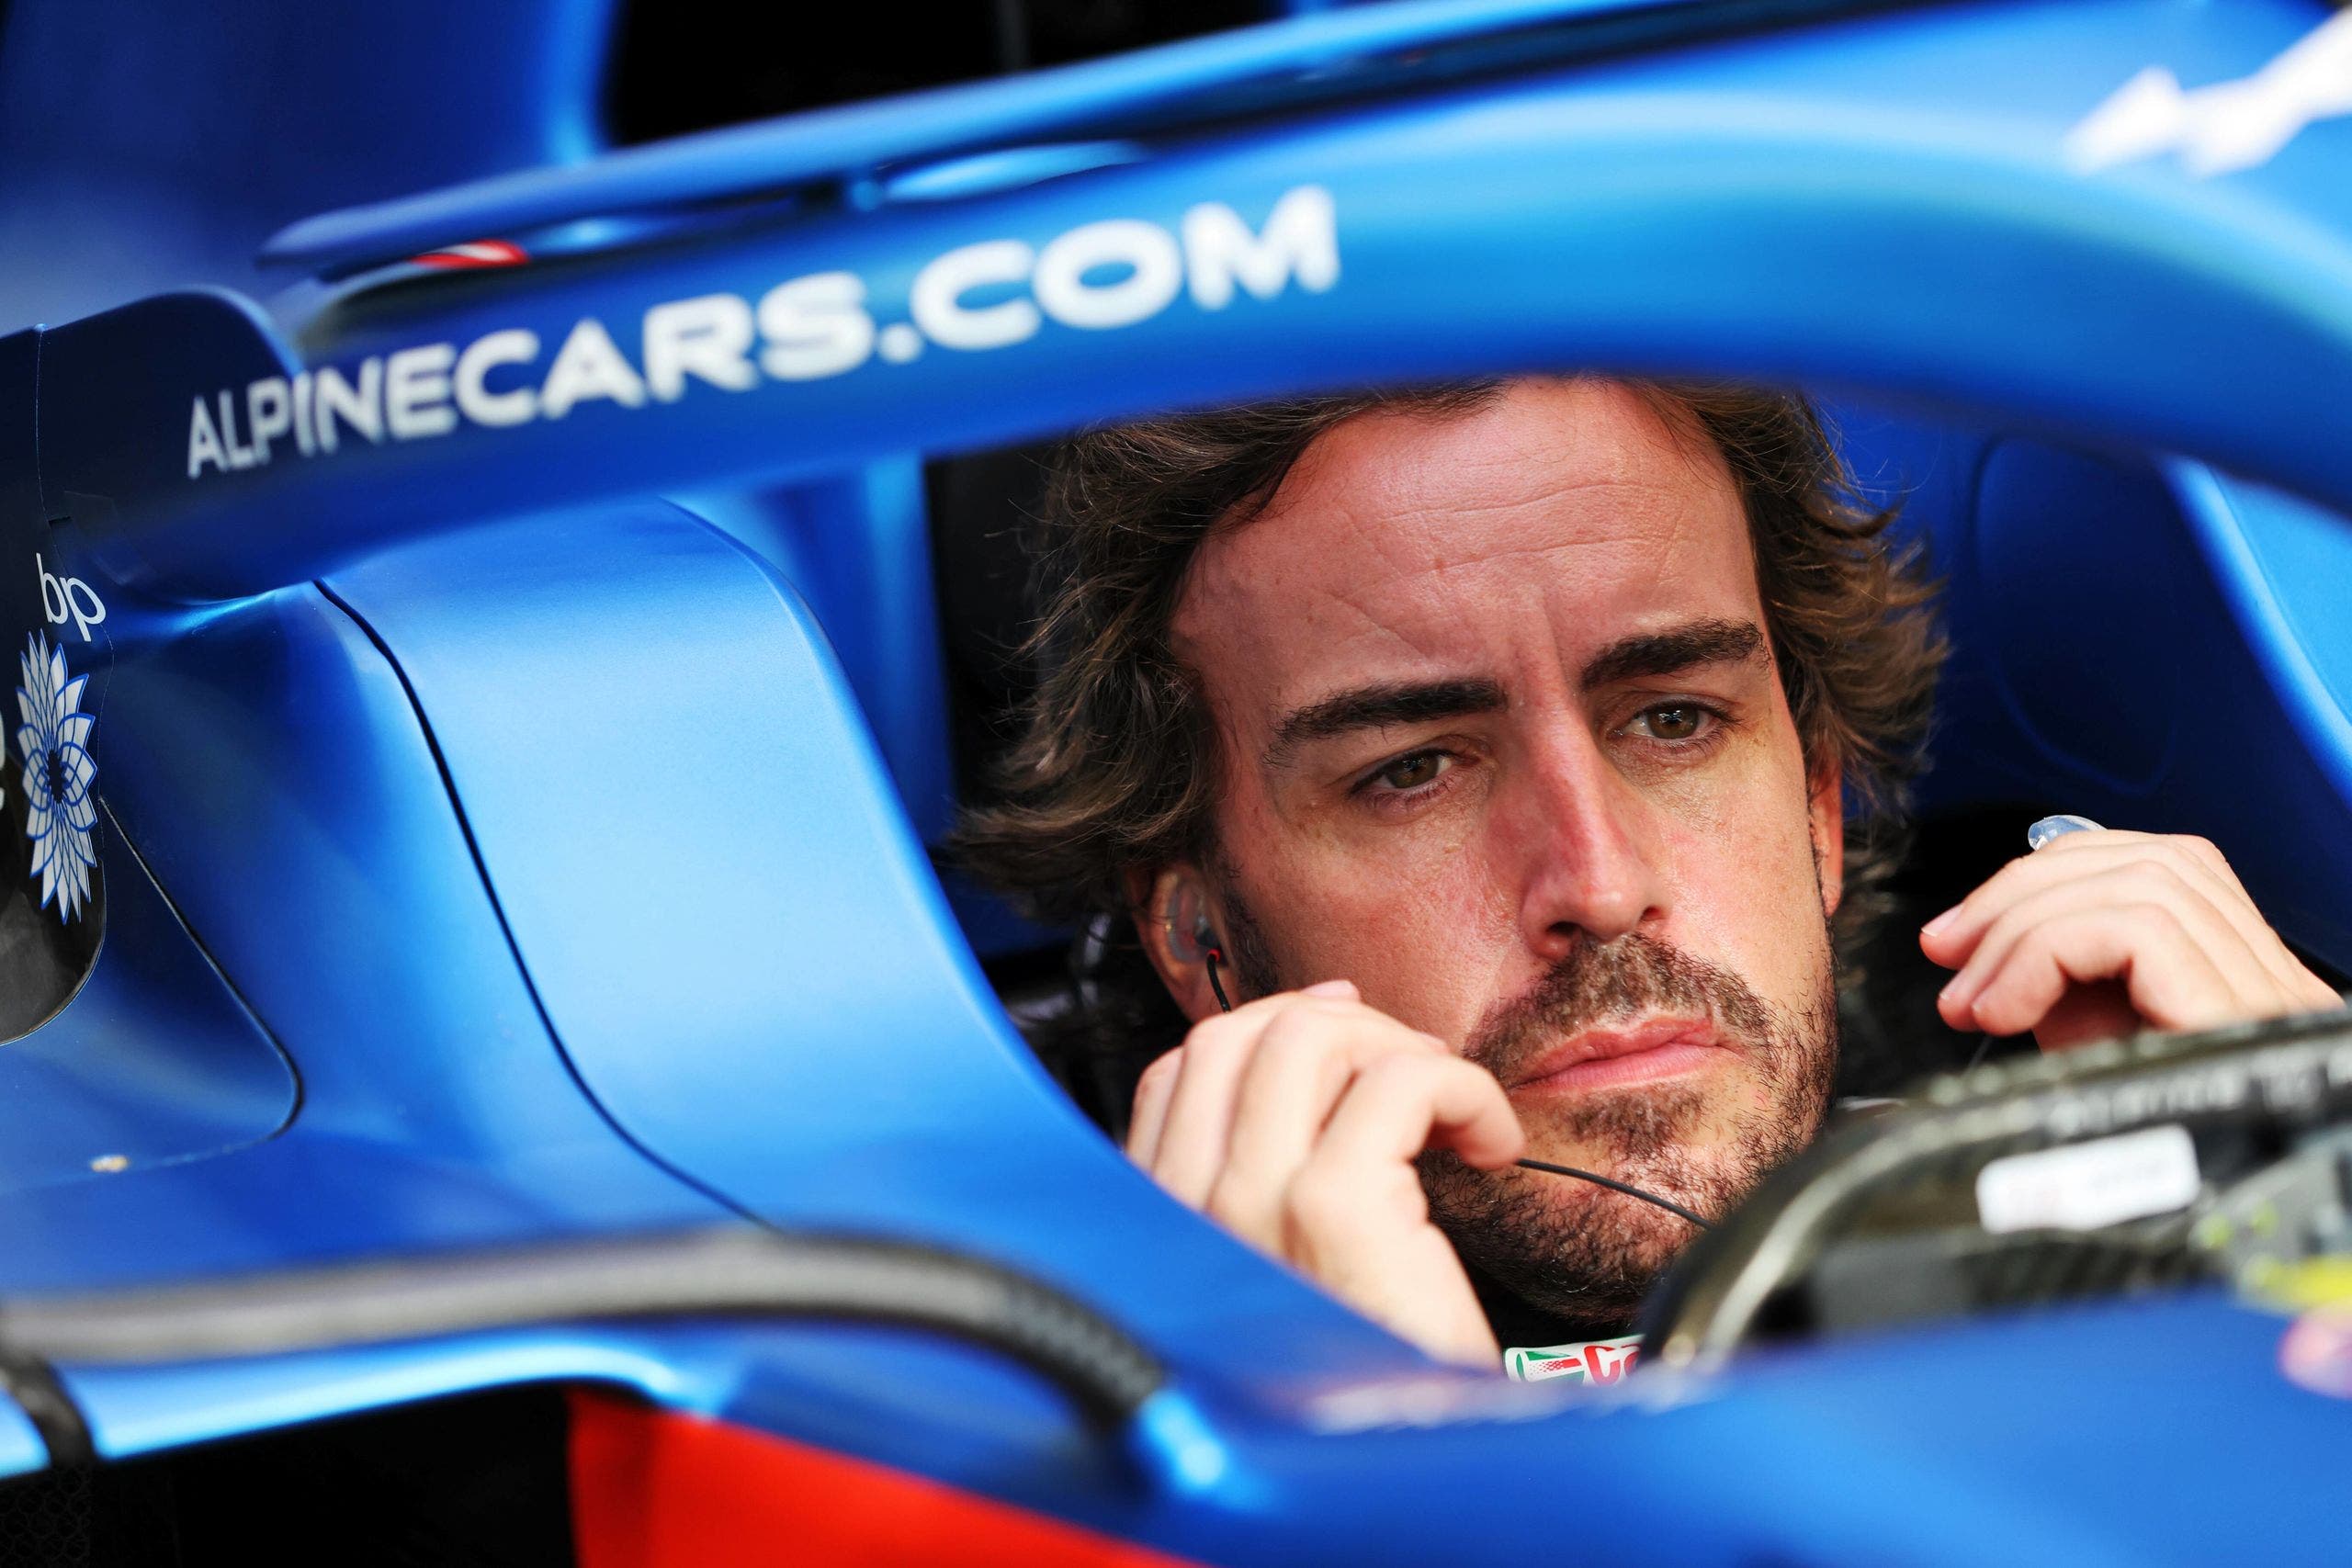 Fernando Alonso breaks Alpine with his future plans in F1
